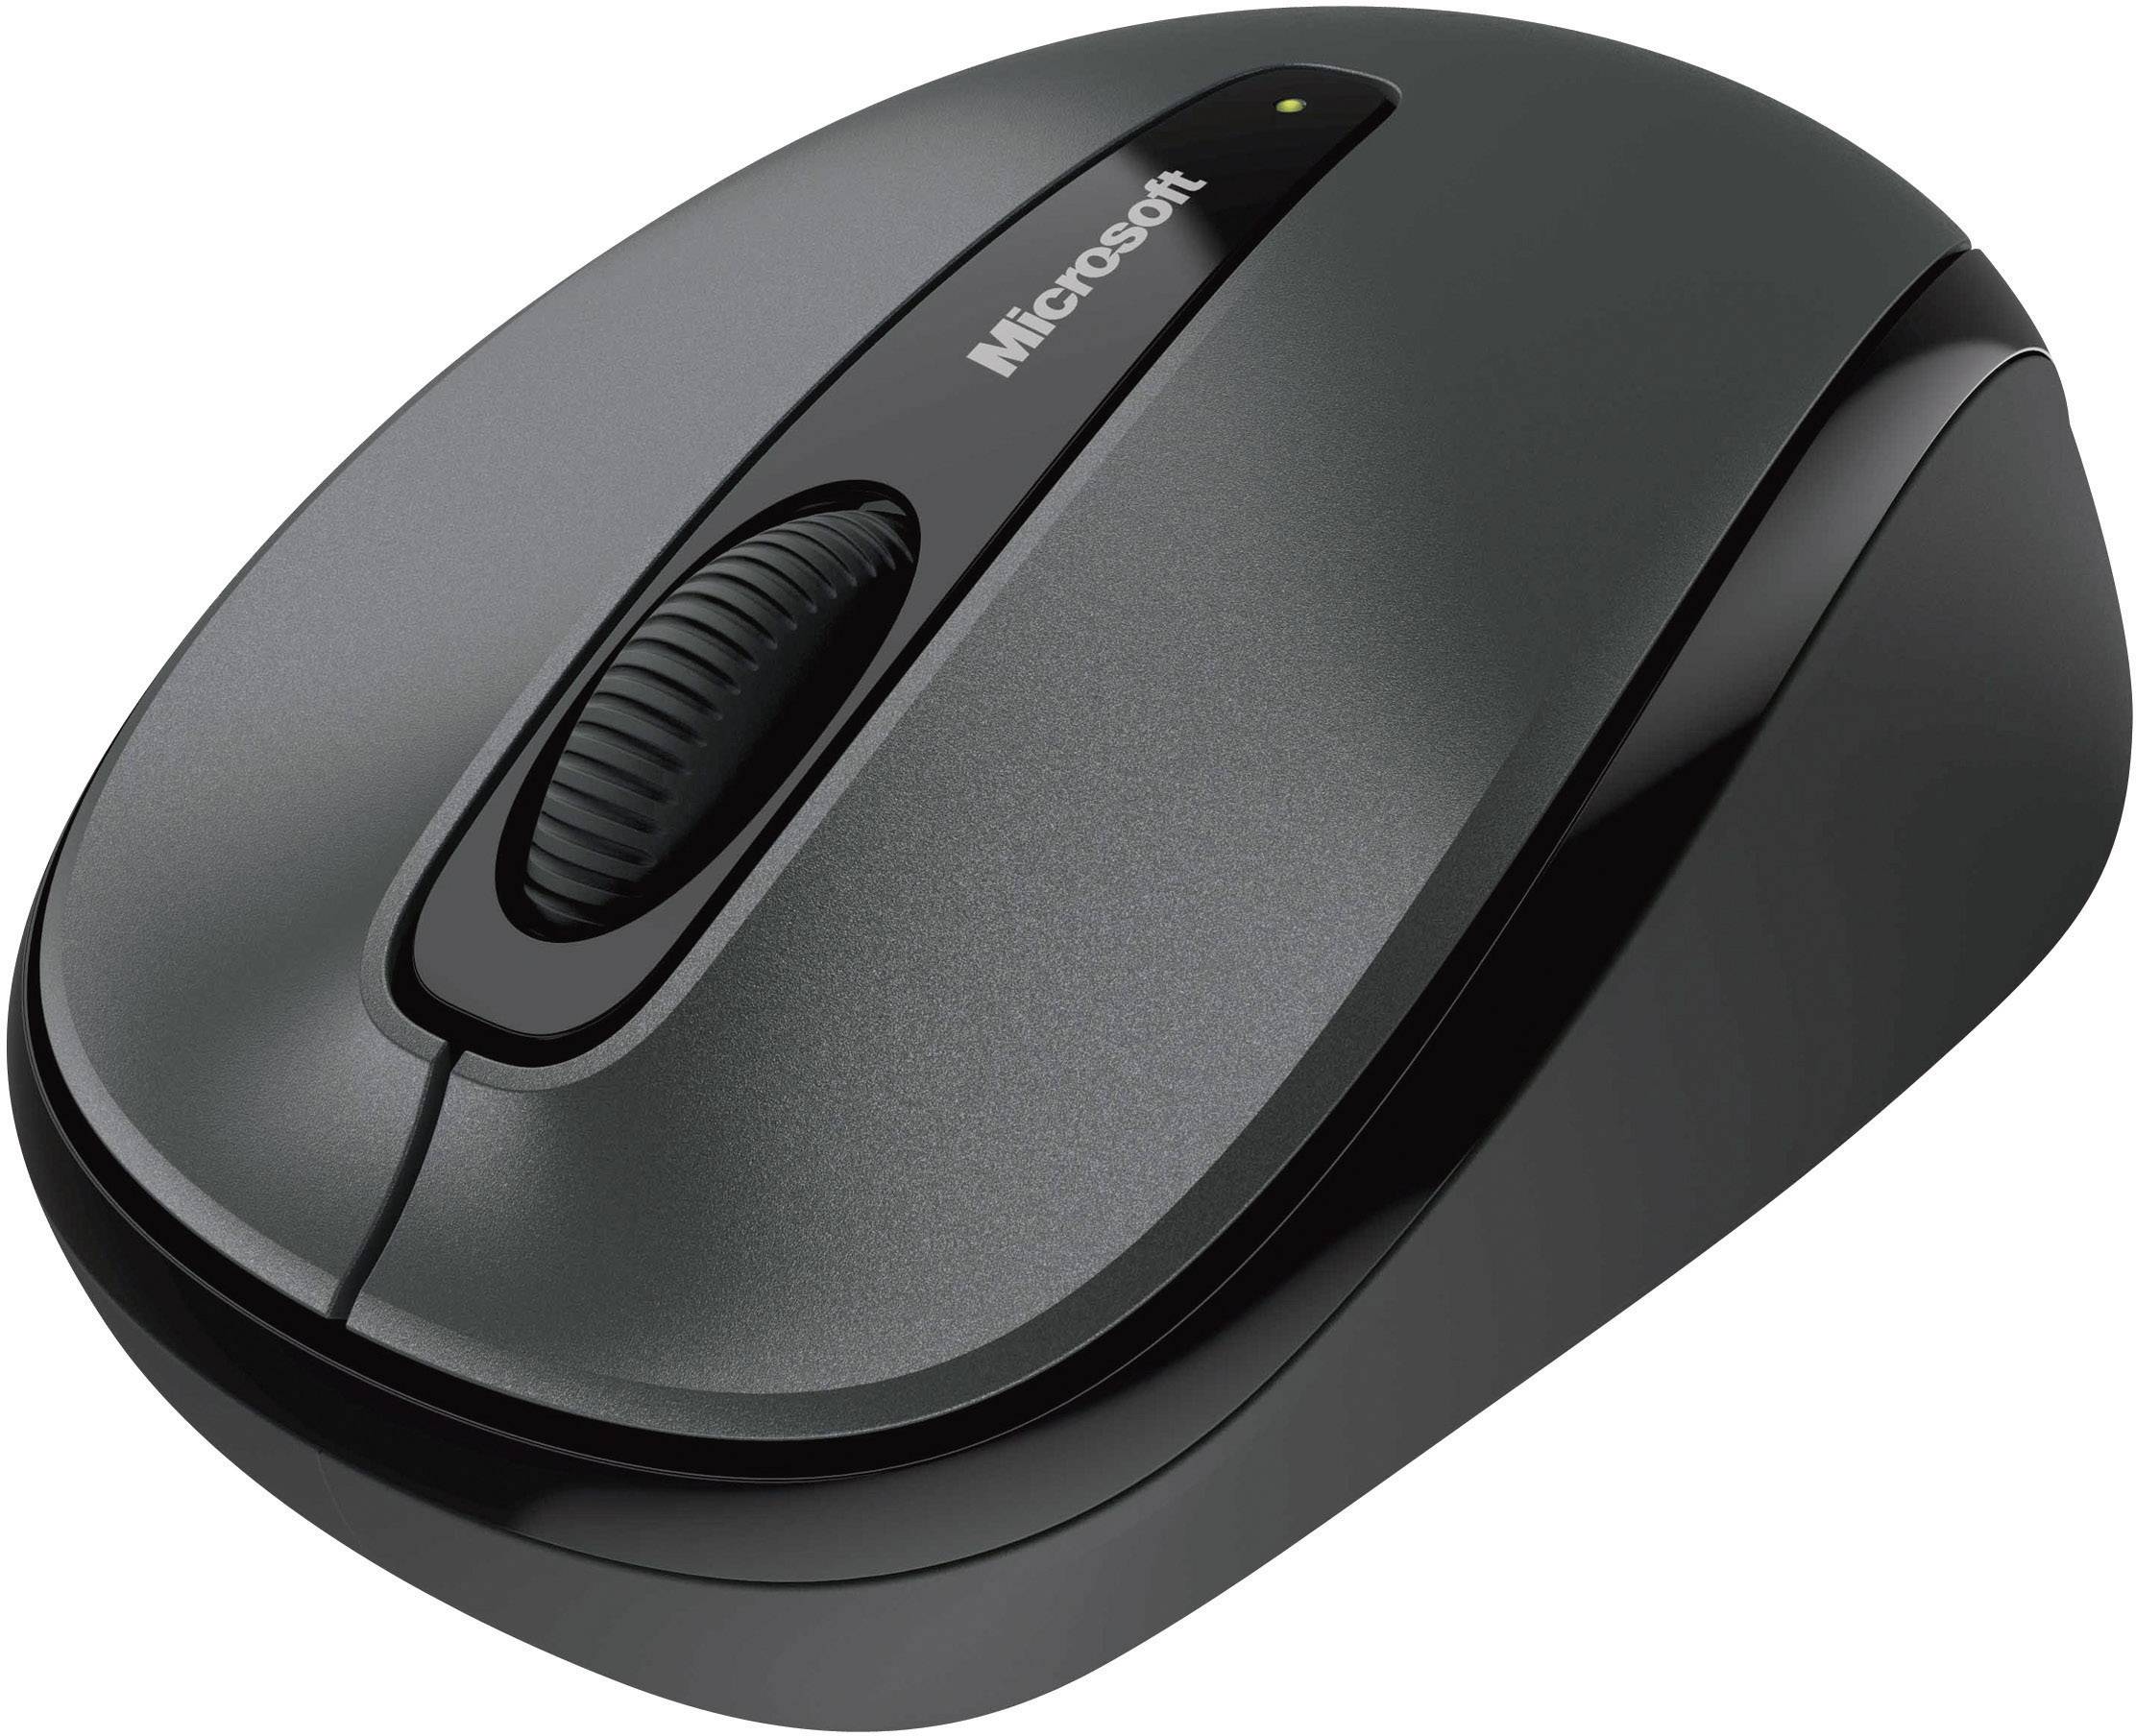 microsoft wireless mouse 3500 scrolling problems